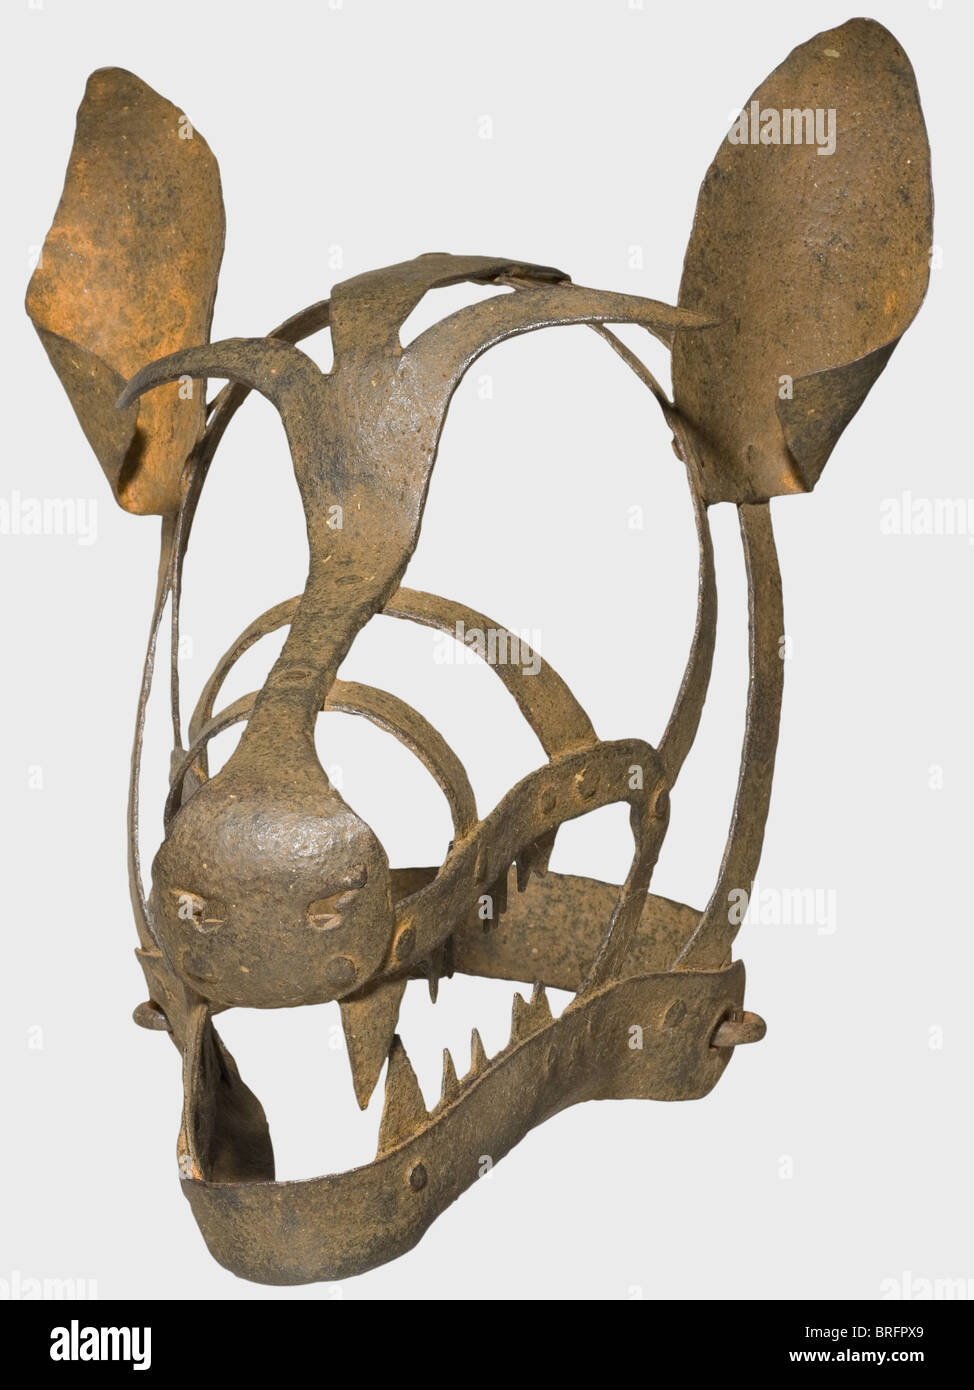 A German mask of disgrace in the shape of a wolf's head,16th/17th century. Forged iron. A mask made from riveted bar stock with pronounced teeth and ears attached by rivets. Two piece,hinged neckband. At the nape of the neck loops for a padlock. Length 40 cm. A mask of disgrace in the shape of a wolf's head was placed on those pilloried for deeds of violence. historic,historical,,17th century,16th century,instrument of torture,torture device,instruments of torture,torture devices,object,objects,stills,clipping,clippings,cut out,cut-out,cut-outs,Additional-Rights-Clearences-Not Available Stock Photo